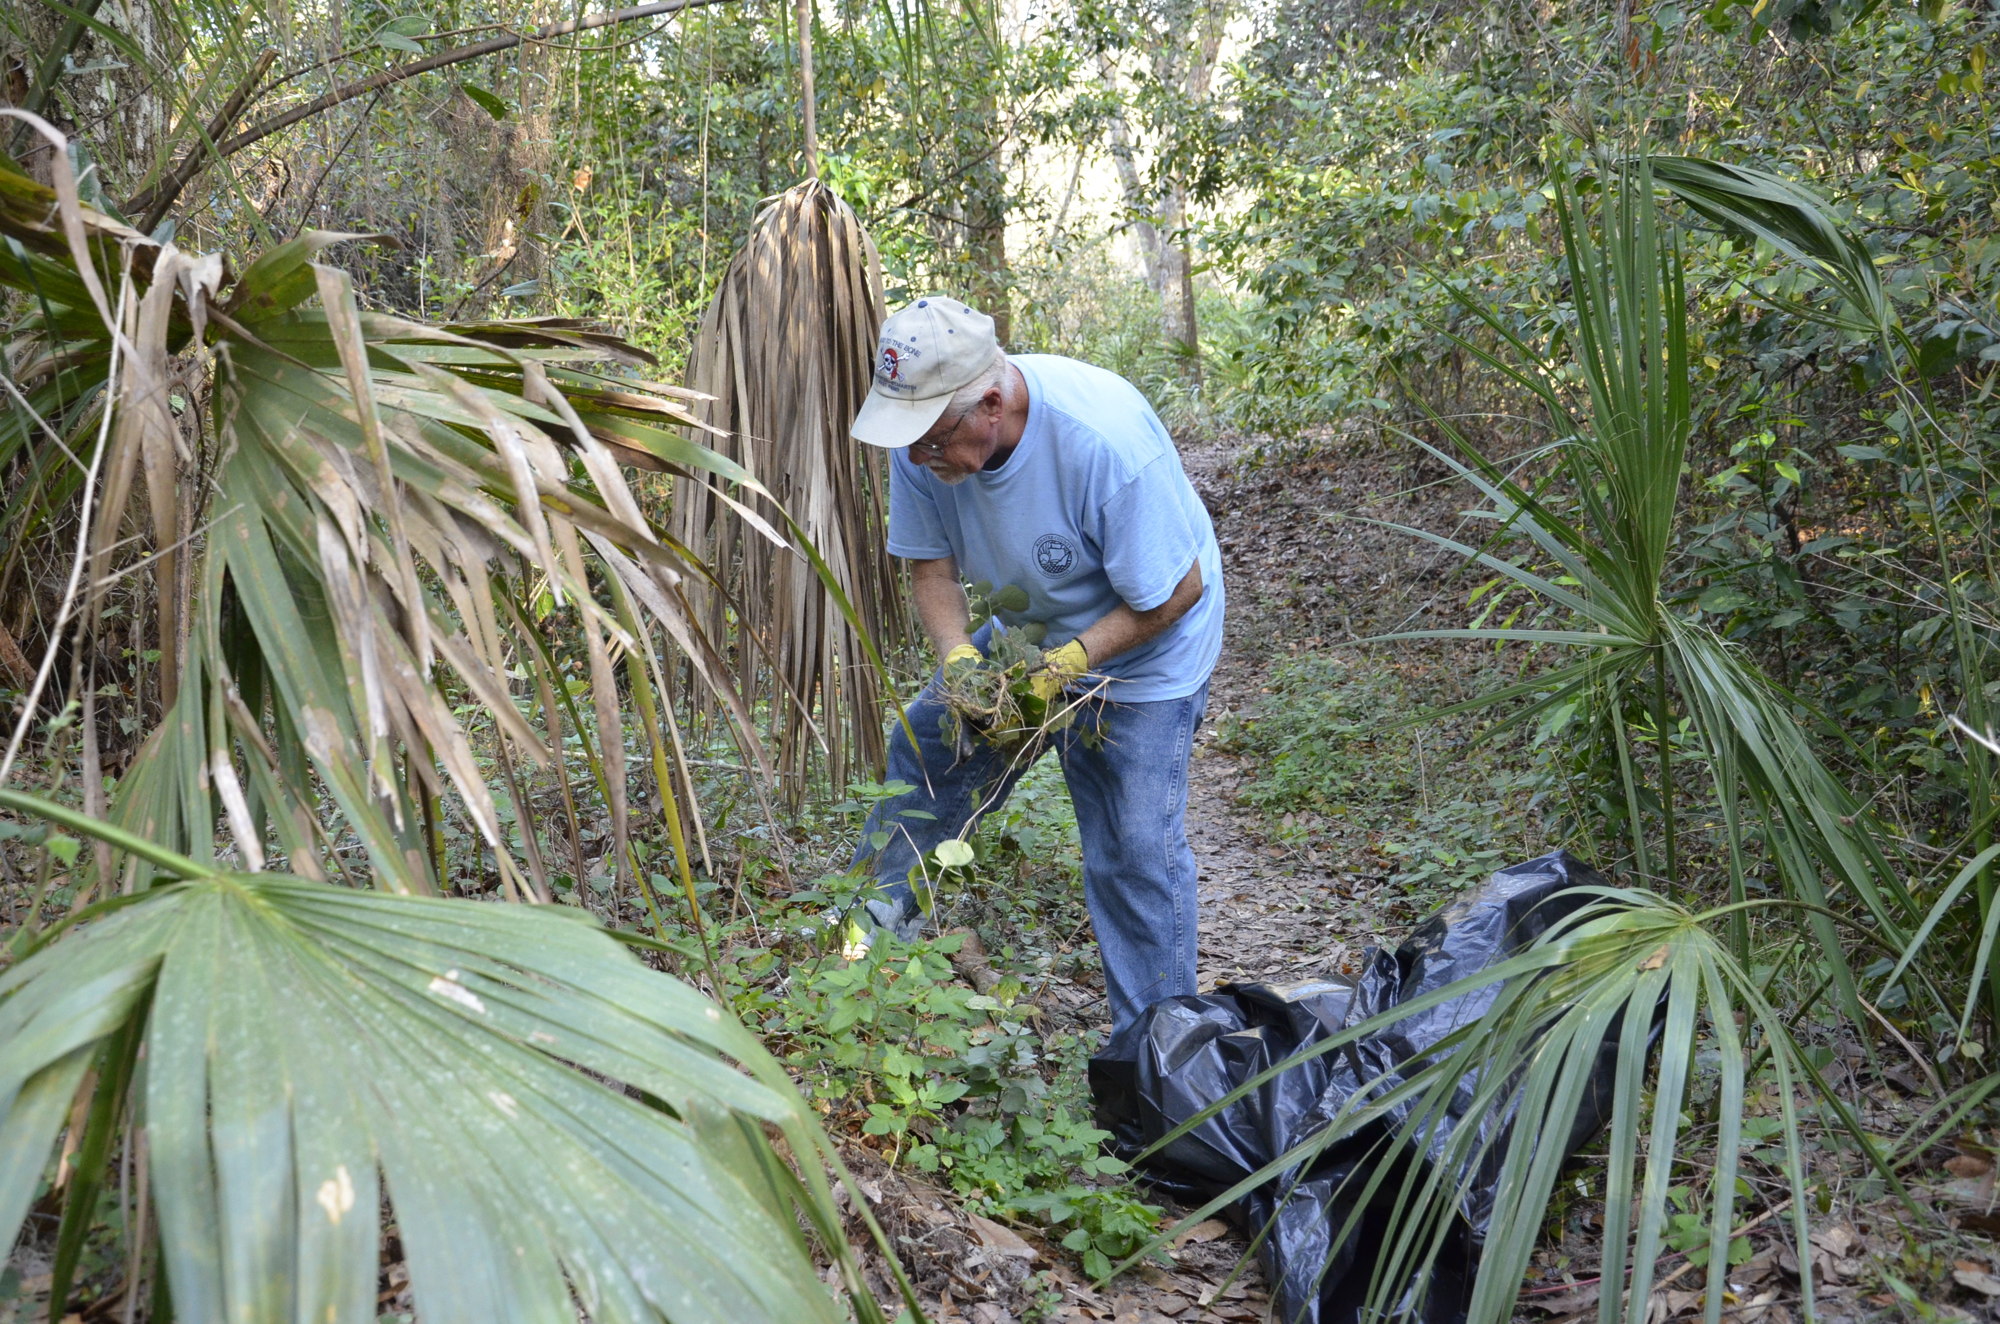 Harry Wiedenmeyer of Parrish, a volunteer for Manatee County, cleans out some dead vines from the trail.